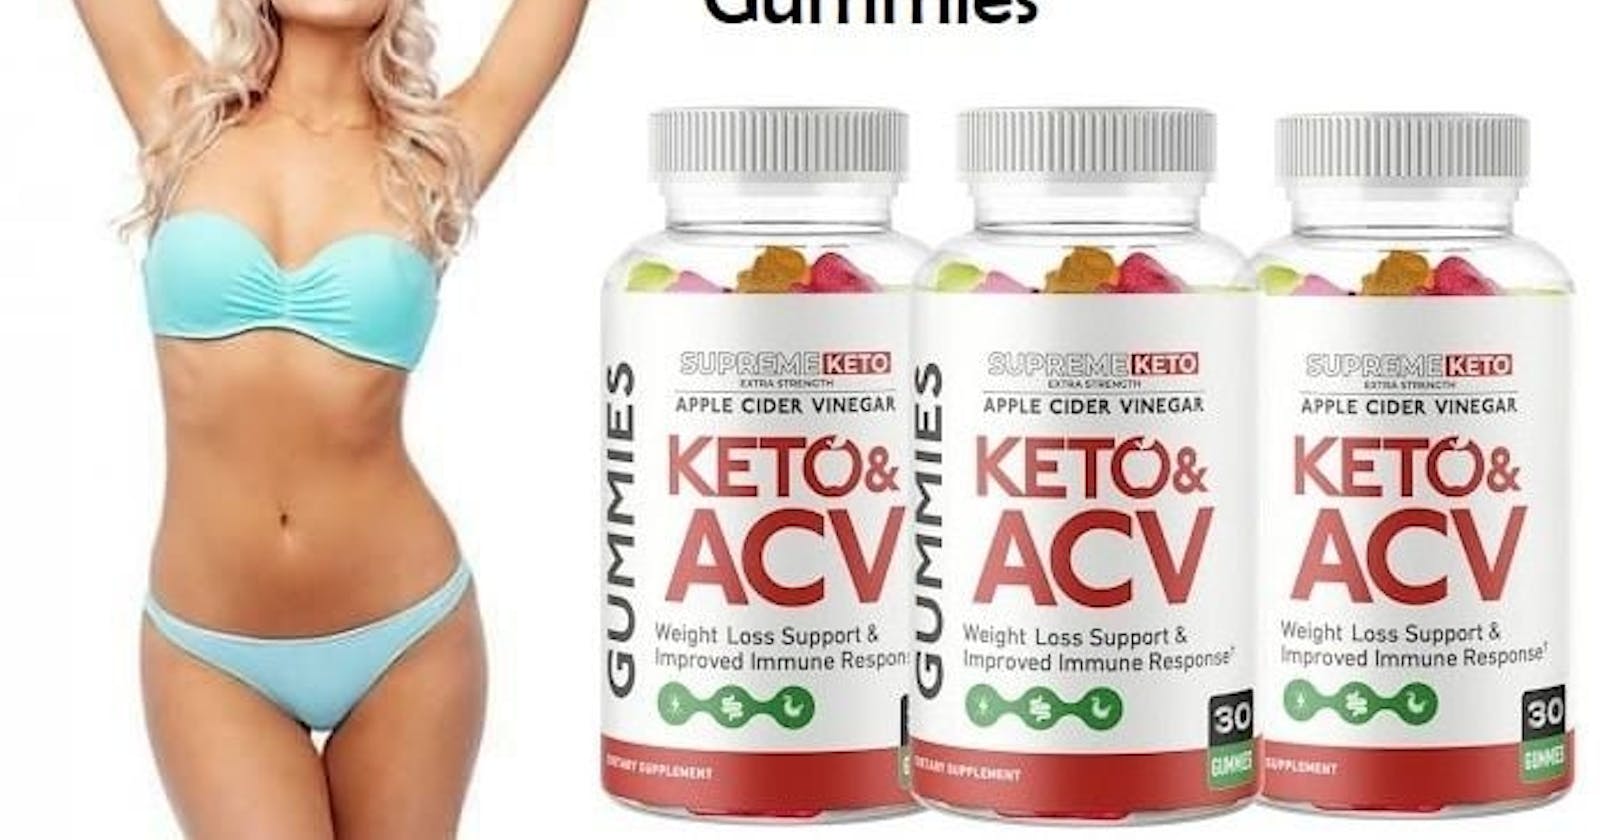 Kelly Clarkson Keto Gummies Canada: The Ultimate Weight Loss Solution?